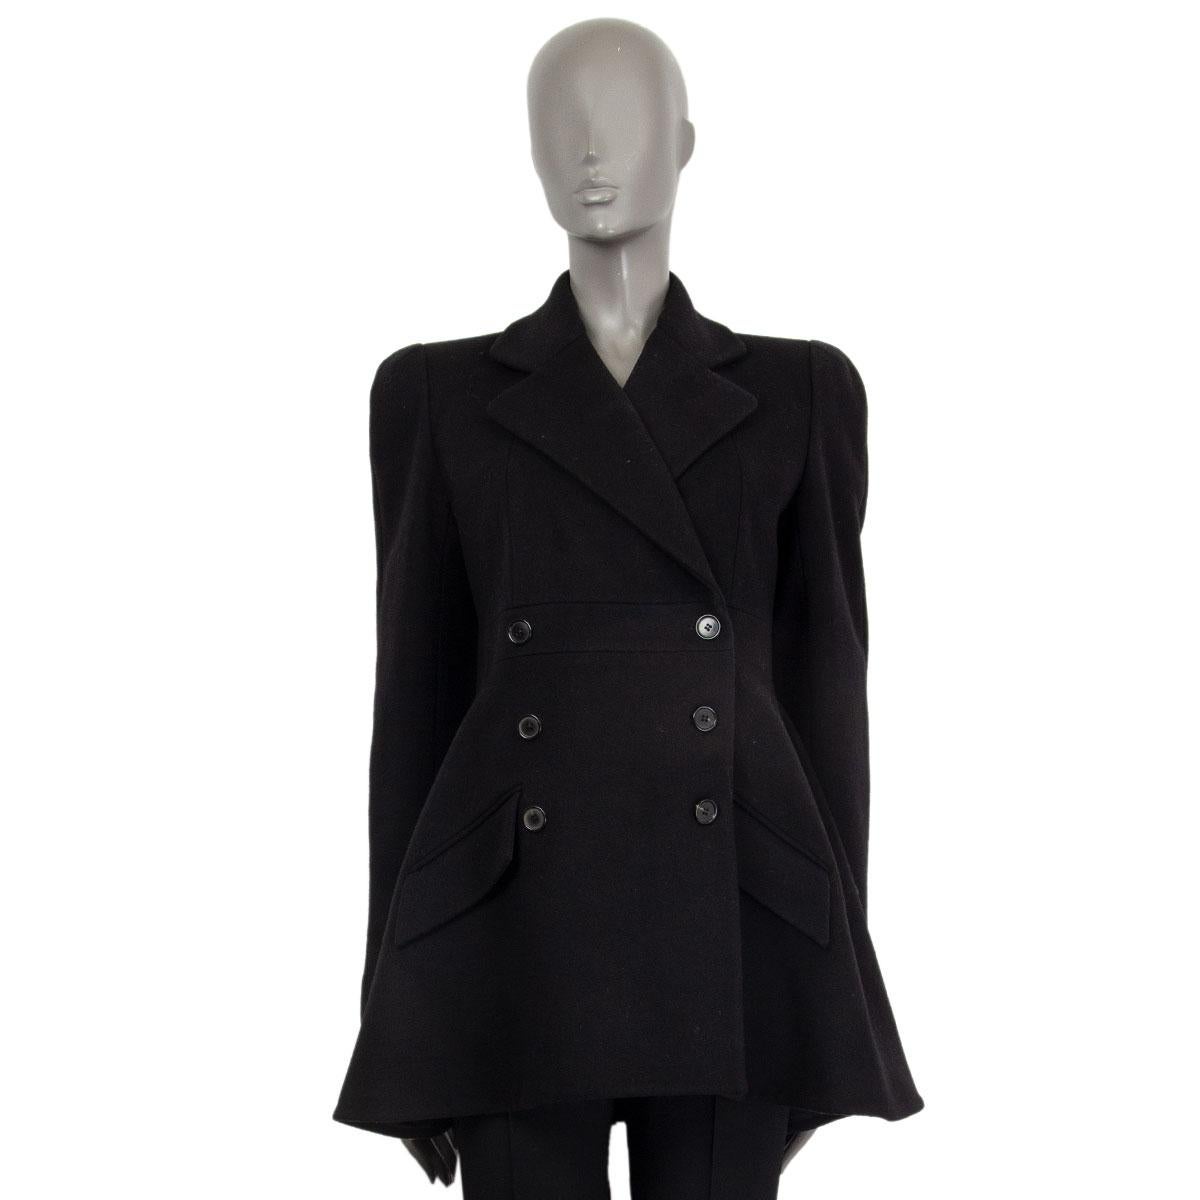 Alexander McQueen double breasted short coat in black wool (95%) and cashmere (5%) with a notch collar and two front decorative pockets. Closes on the front with buttons. Lined in curpo (100%). Flares at the bottom. Has been worn and is in excellent